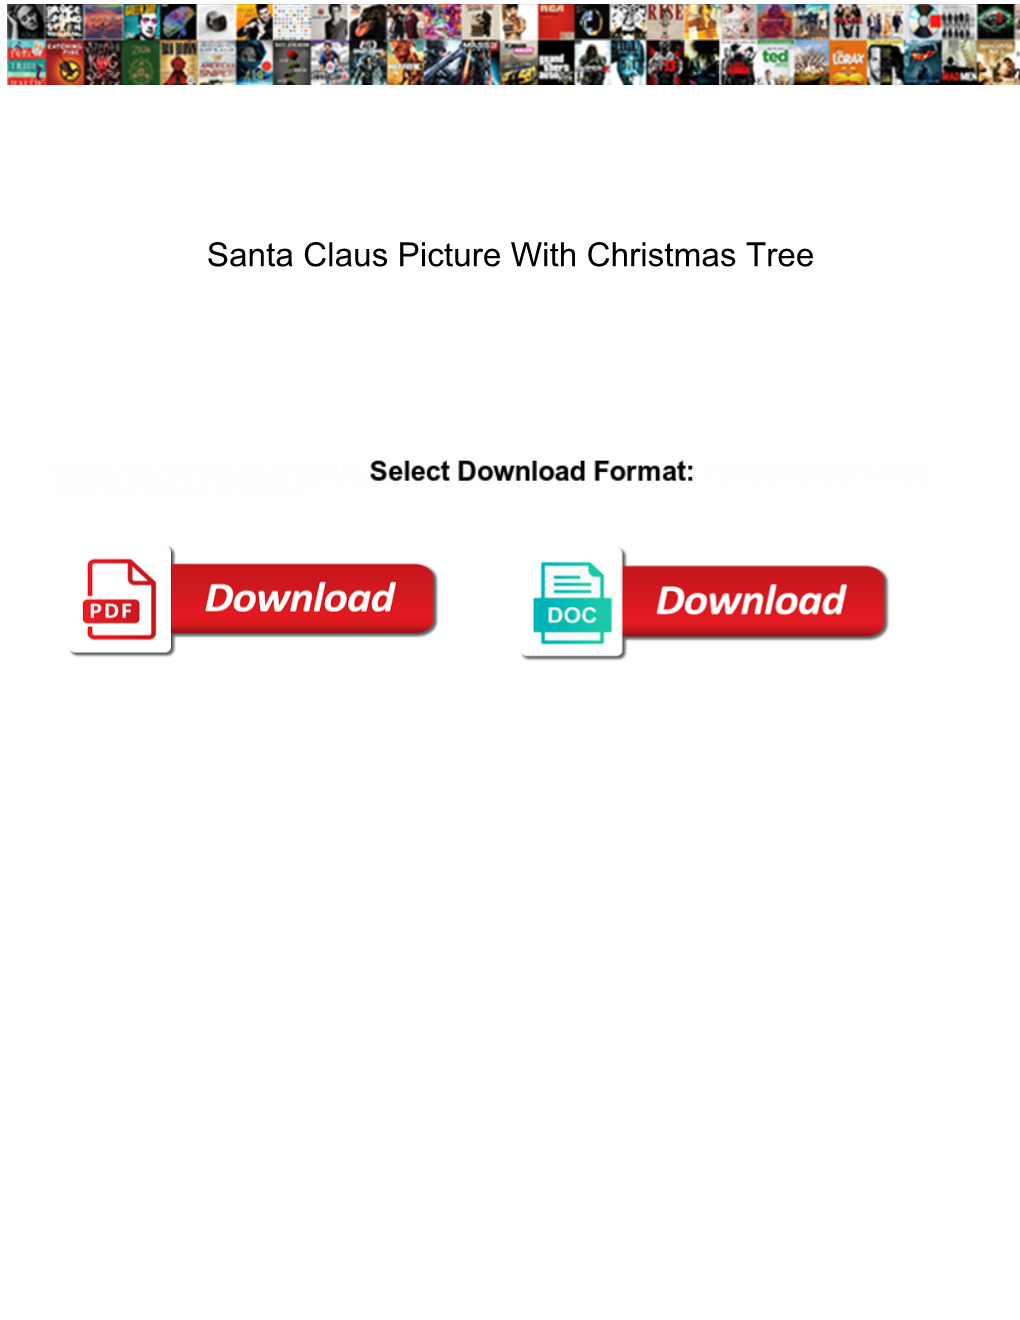 Santa Claus Picture with Christmas Tree